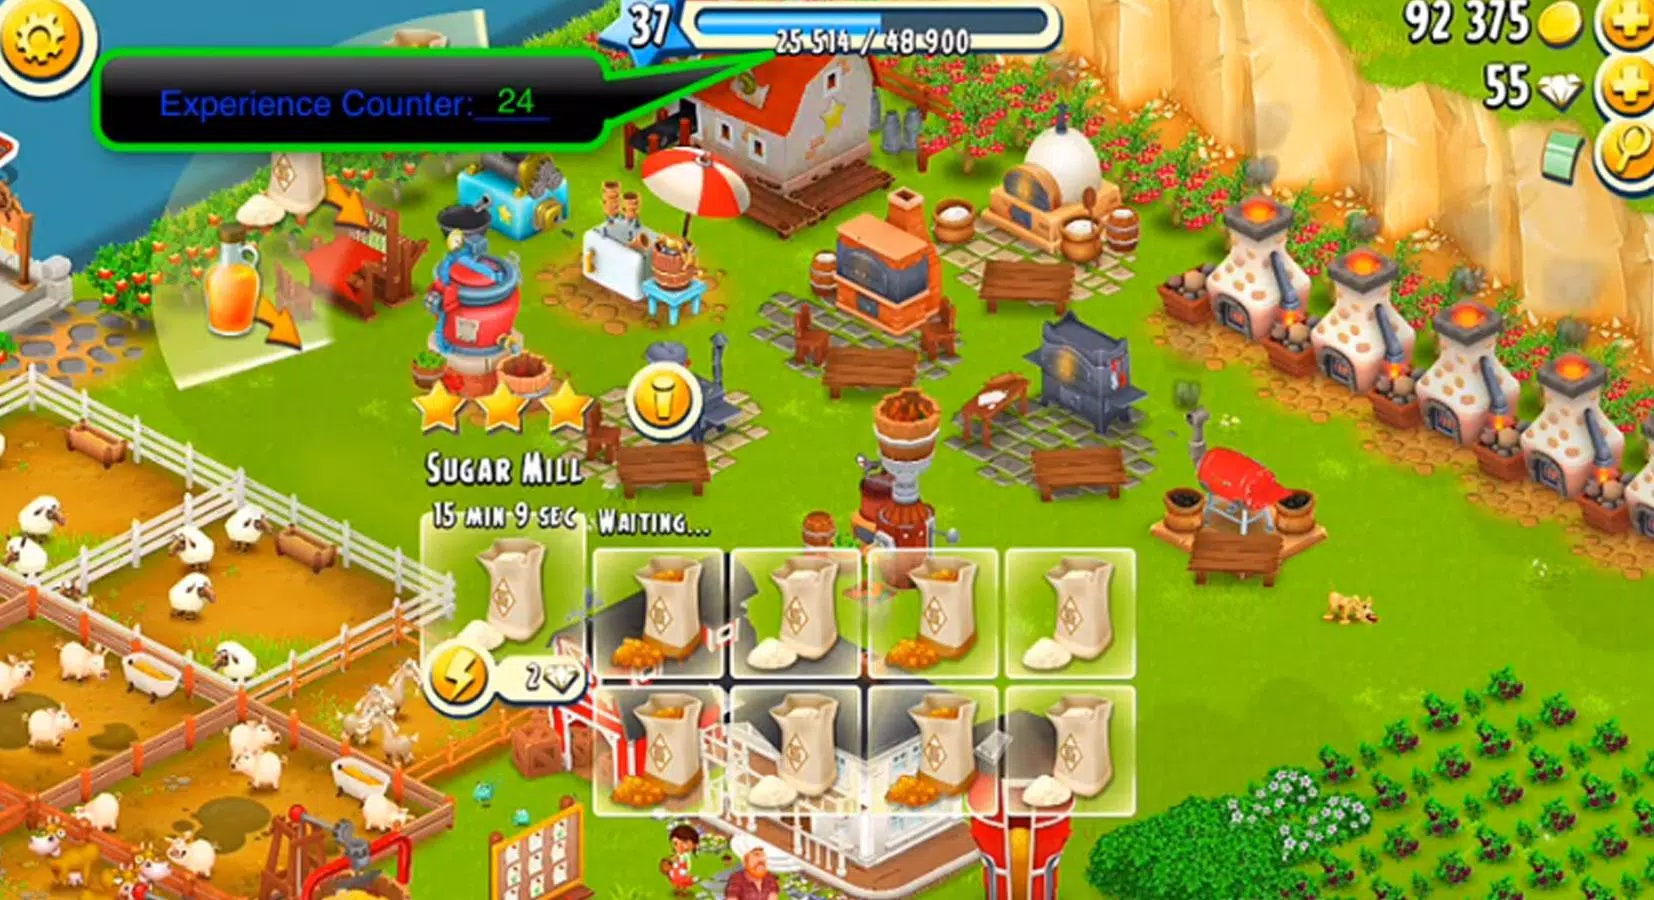 Tải Xuống Apk Guide Hay Day Cho Android